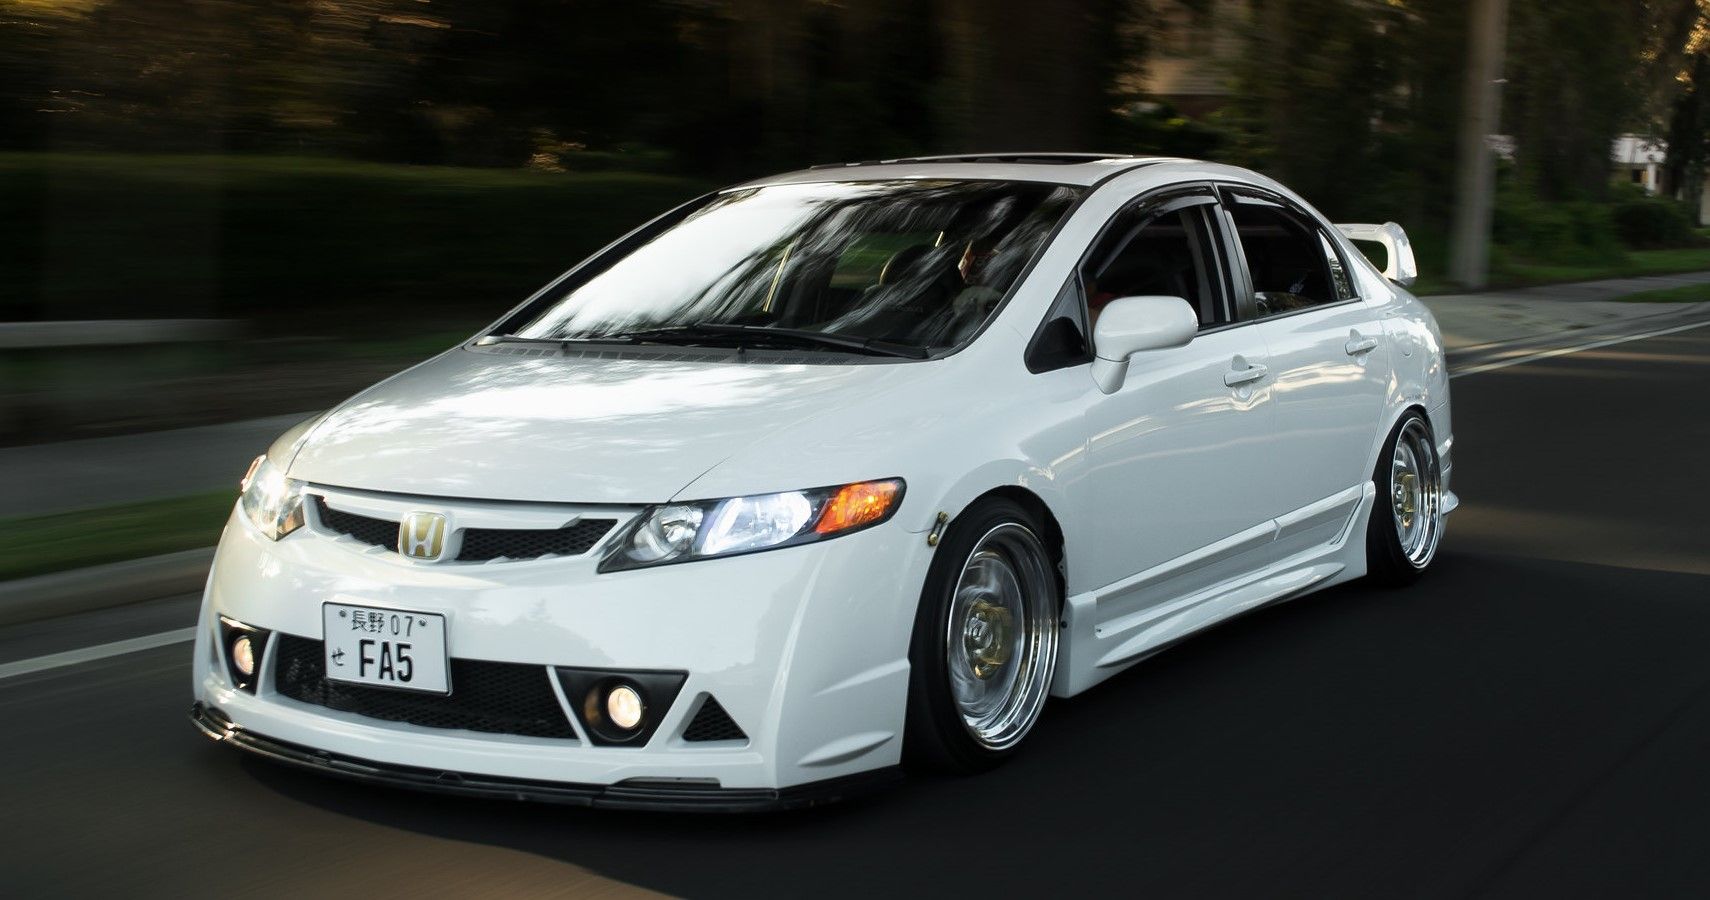 Stanced Honda Civic on the road front third quarter view